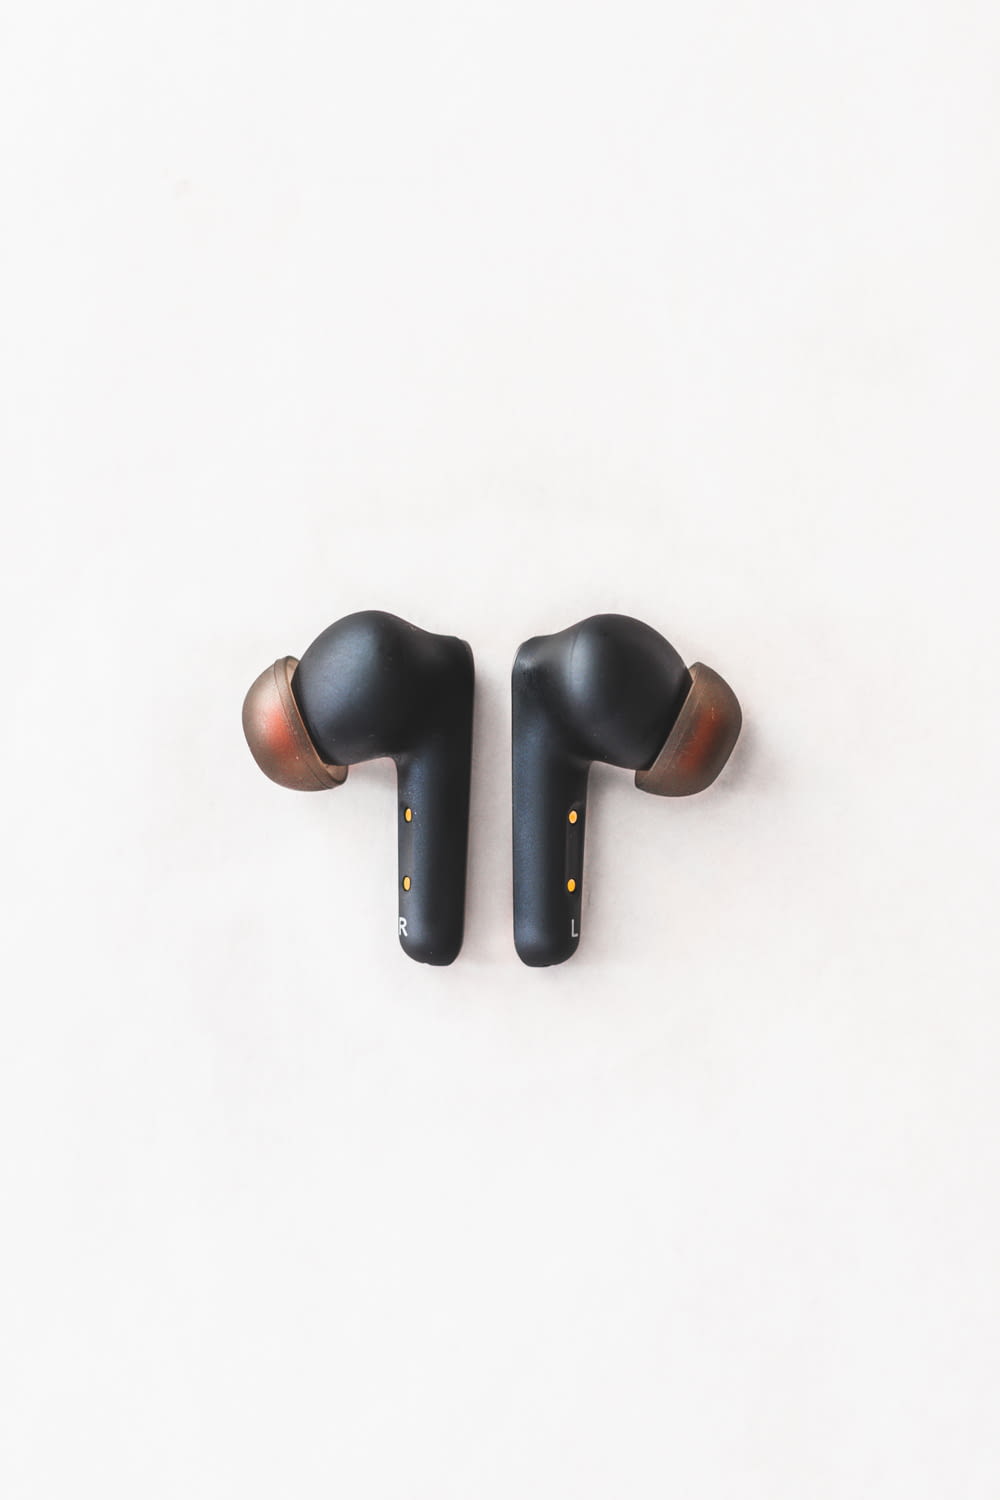 a pair of black ear buds sitting on top of a white surface